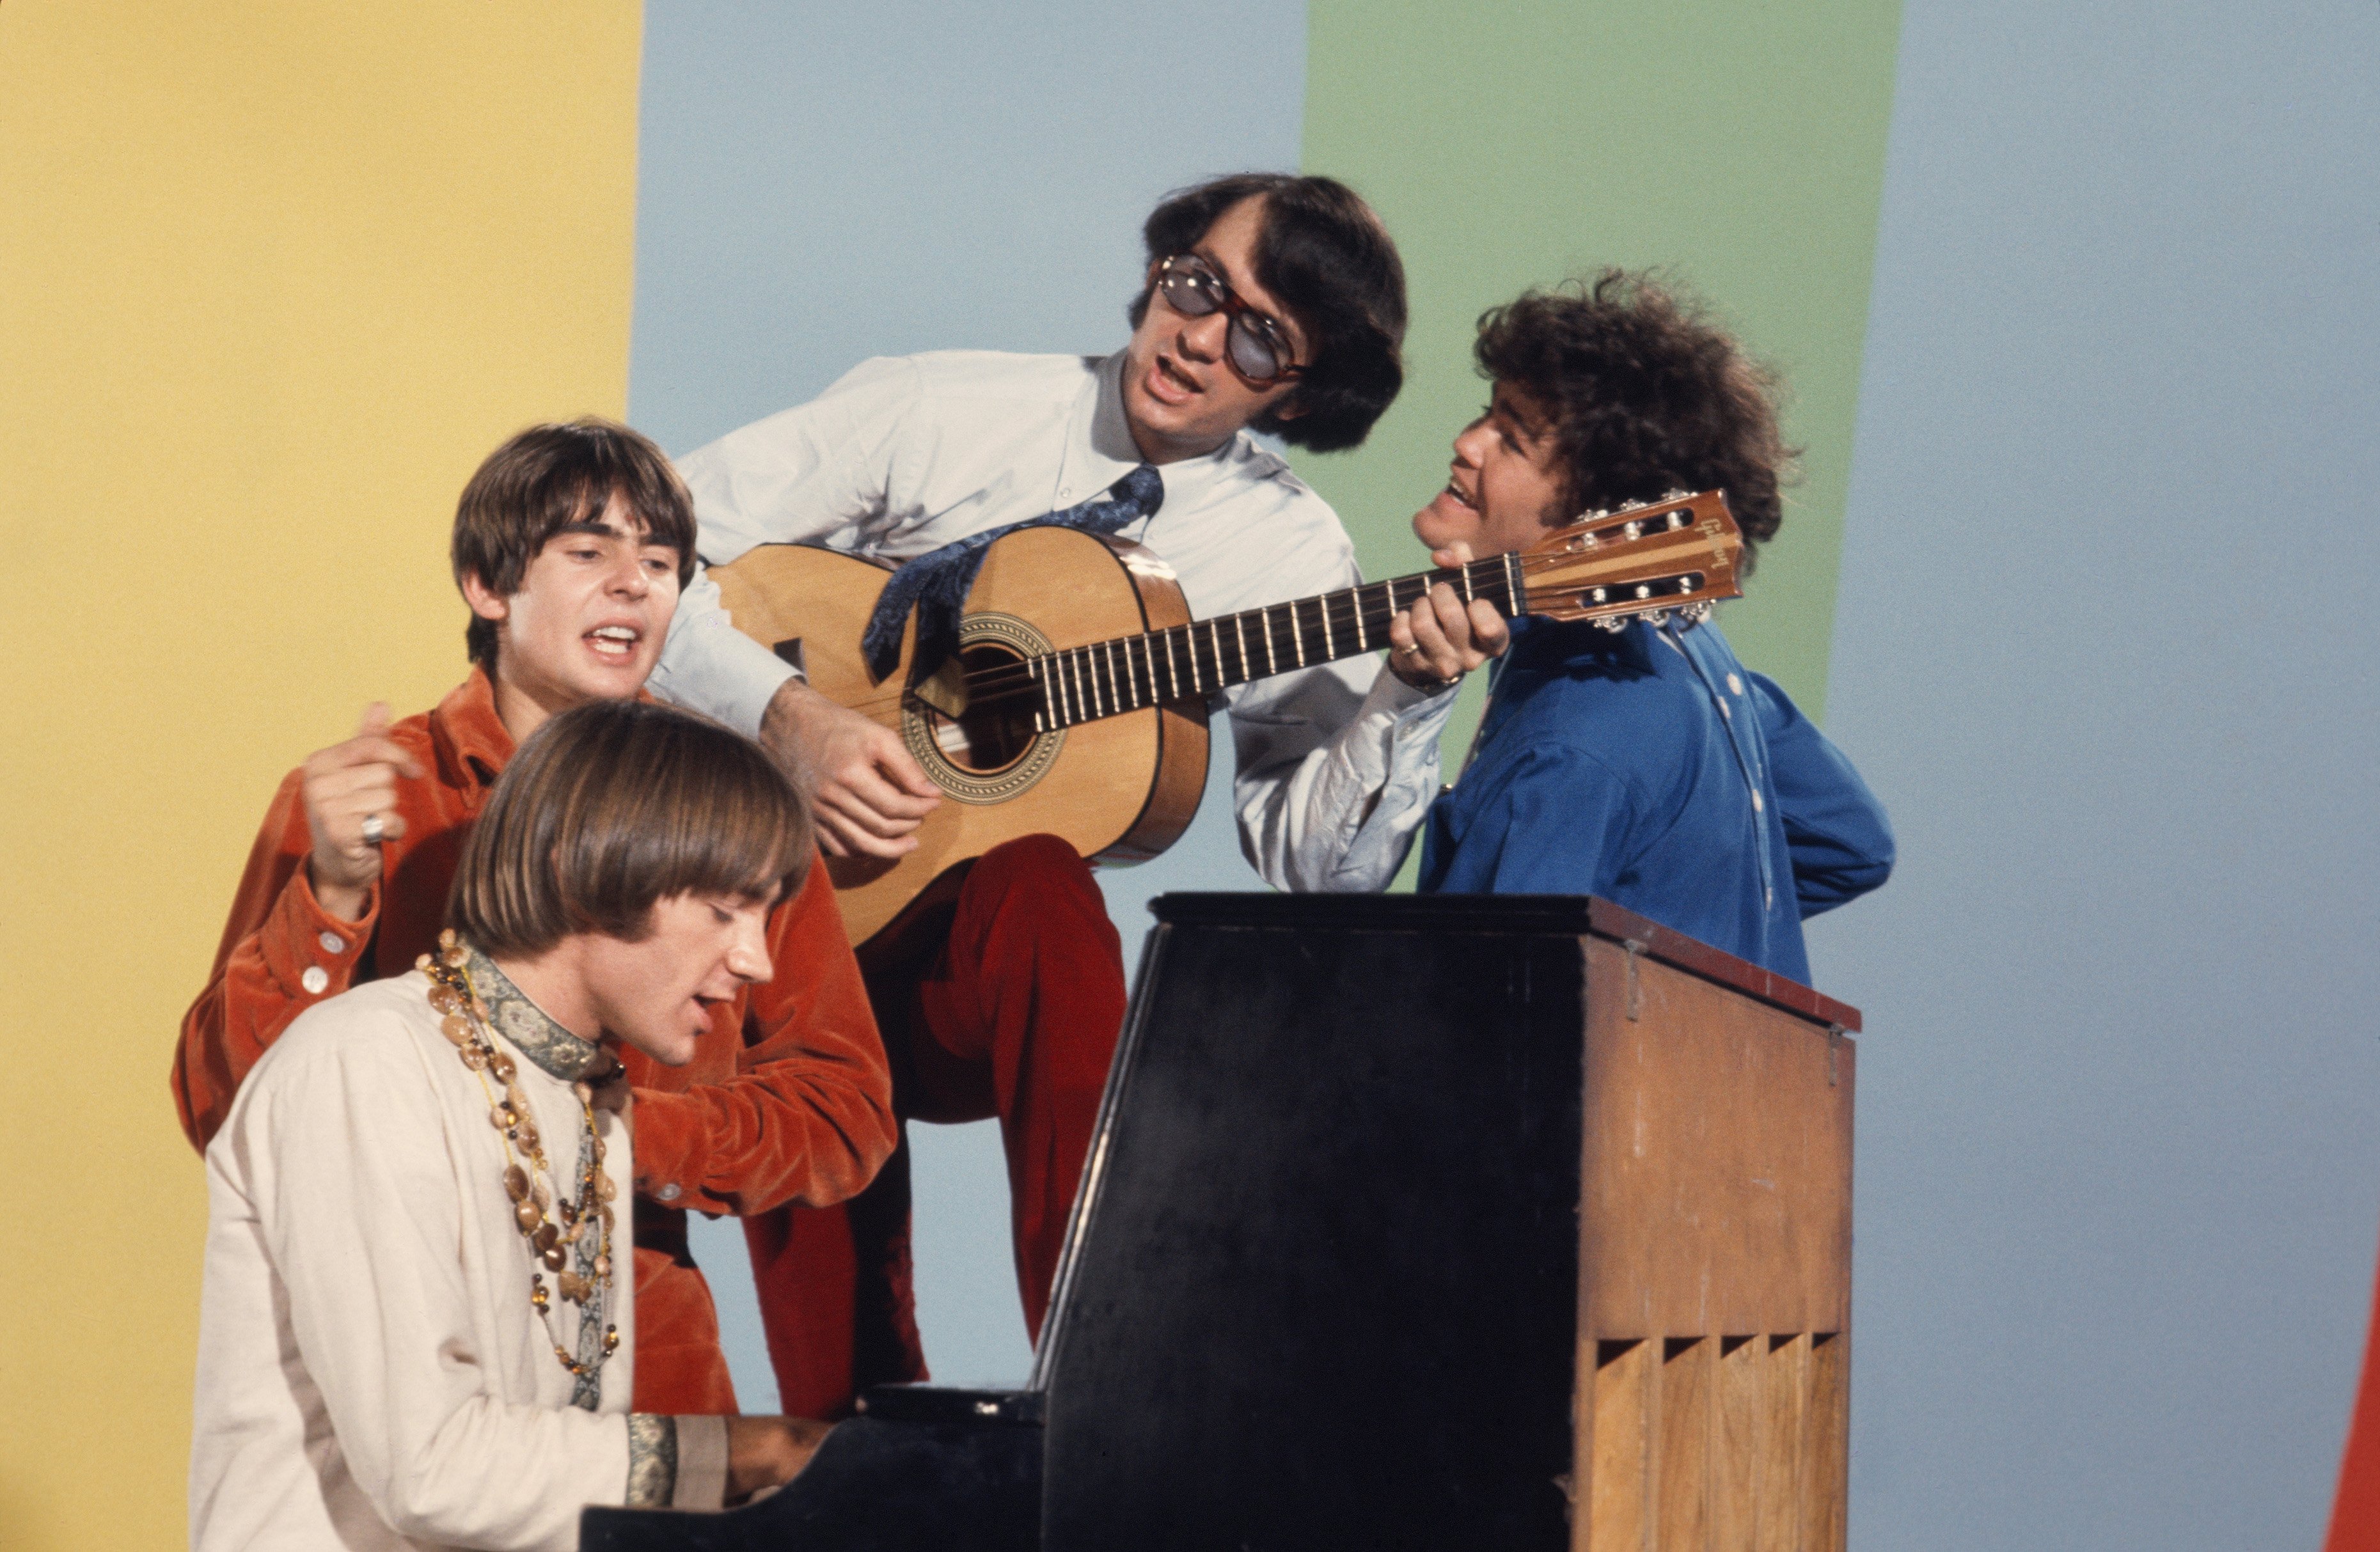 The Monkees' Davy Jones, Peter Tork, Mike Nesmith, and Mickey Dolenz around a piano